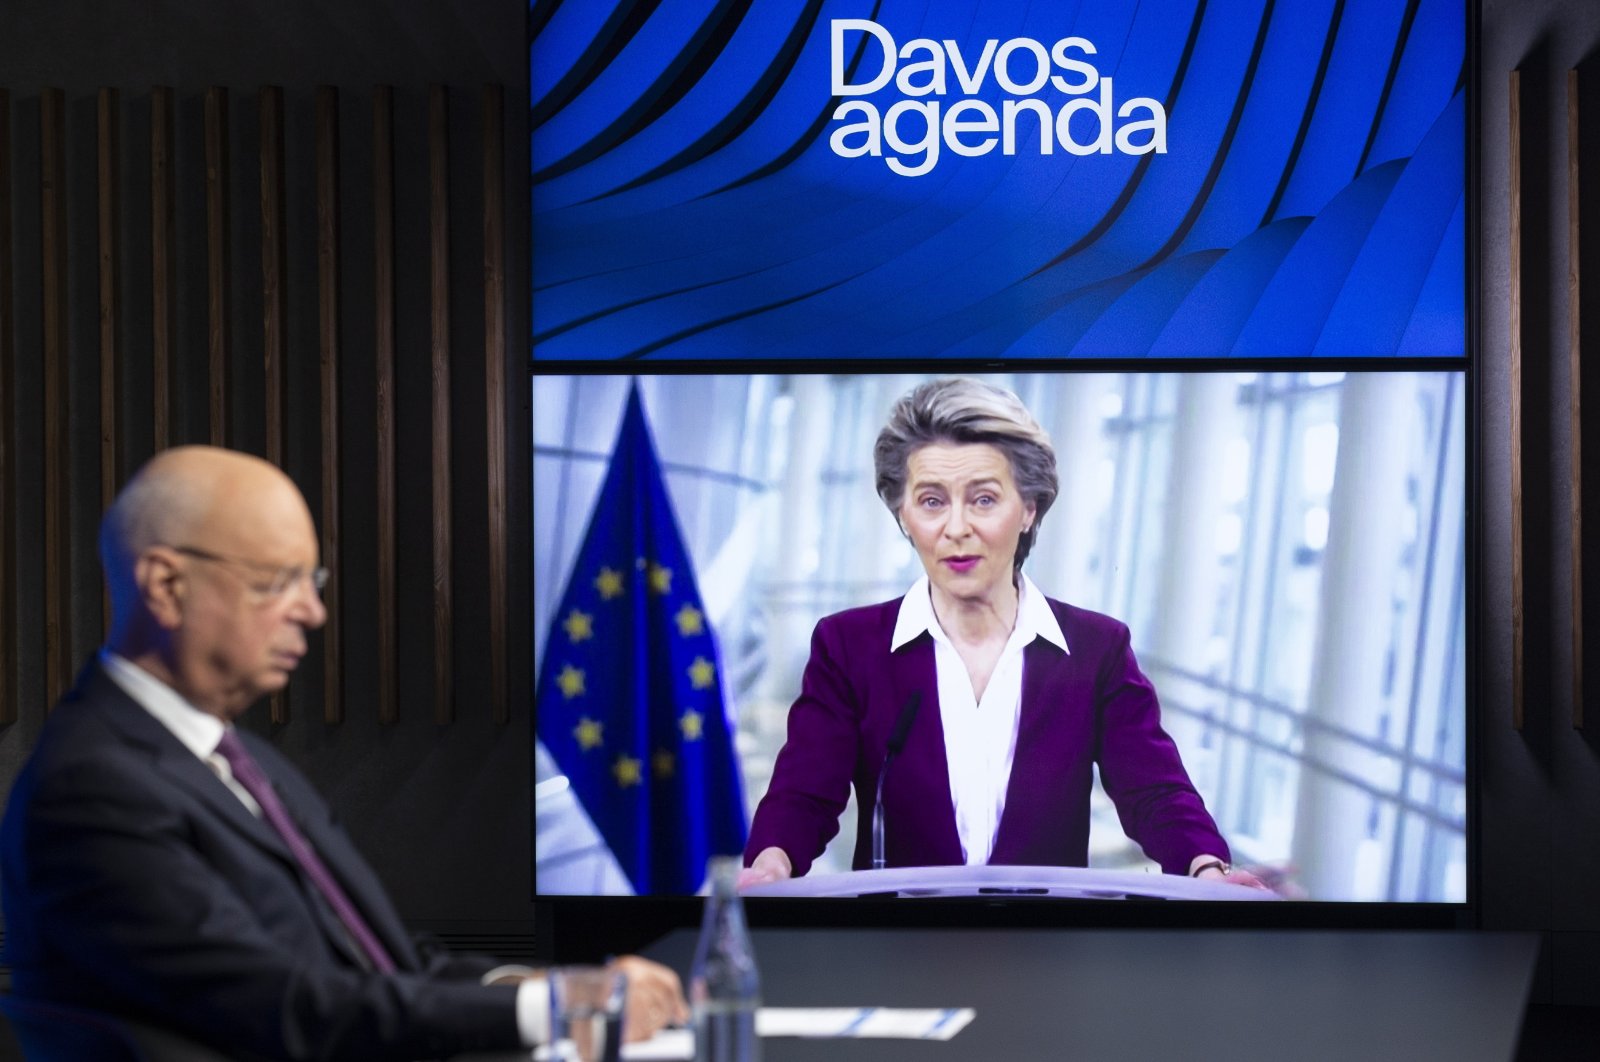 German Klaus Schwab (L), founder and executive chairman of the World Economic Forum (WEF), listens to European Commission President Ursula von der Leyen, displayed on a video screen, during a conference at the Davos Agenda in Cologny near Geneva, Switzerland, Jan. 26, 2021. (AP Photo)